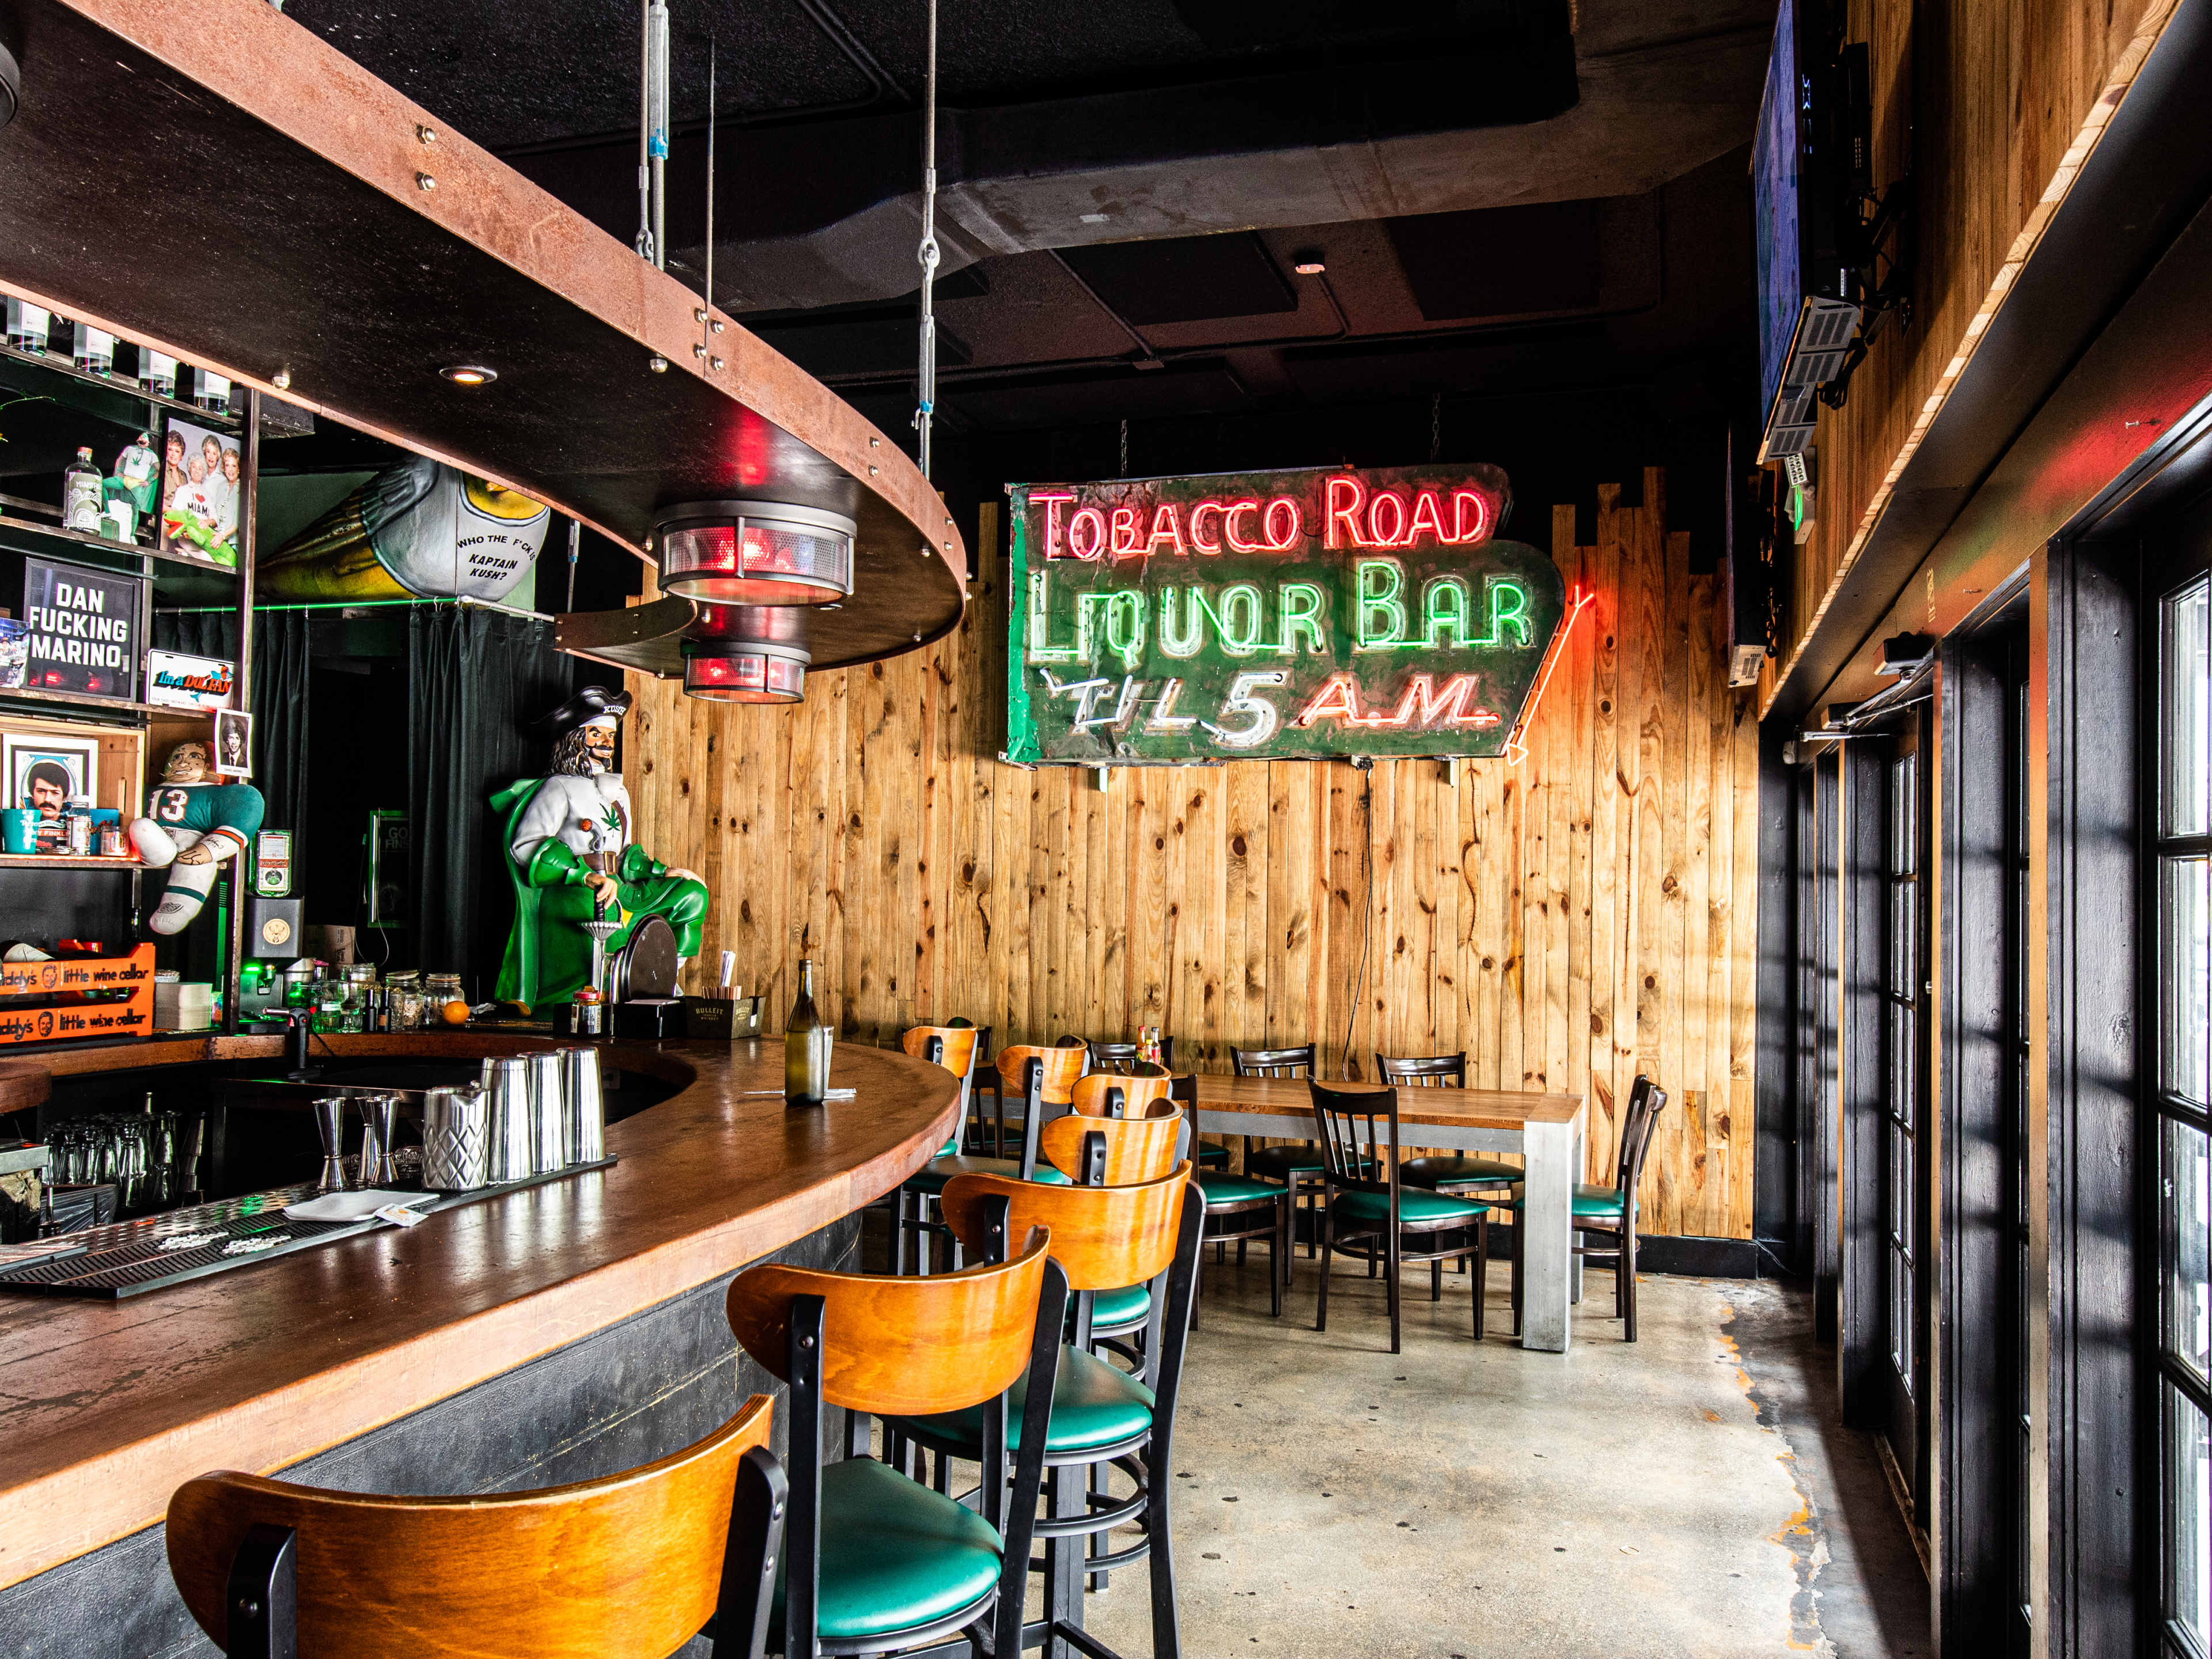 interior of old school bar with neon signs and wooden walls